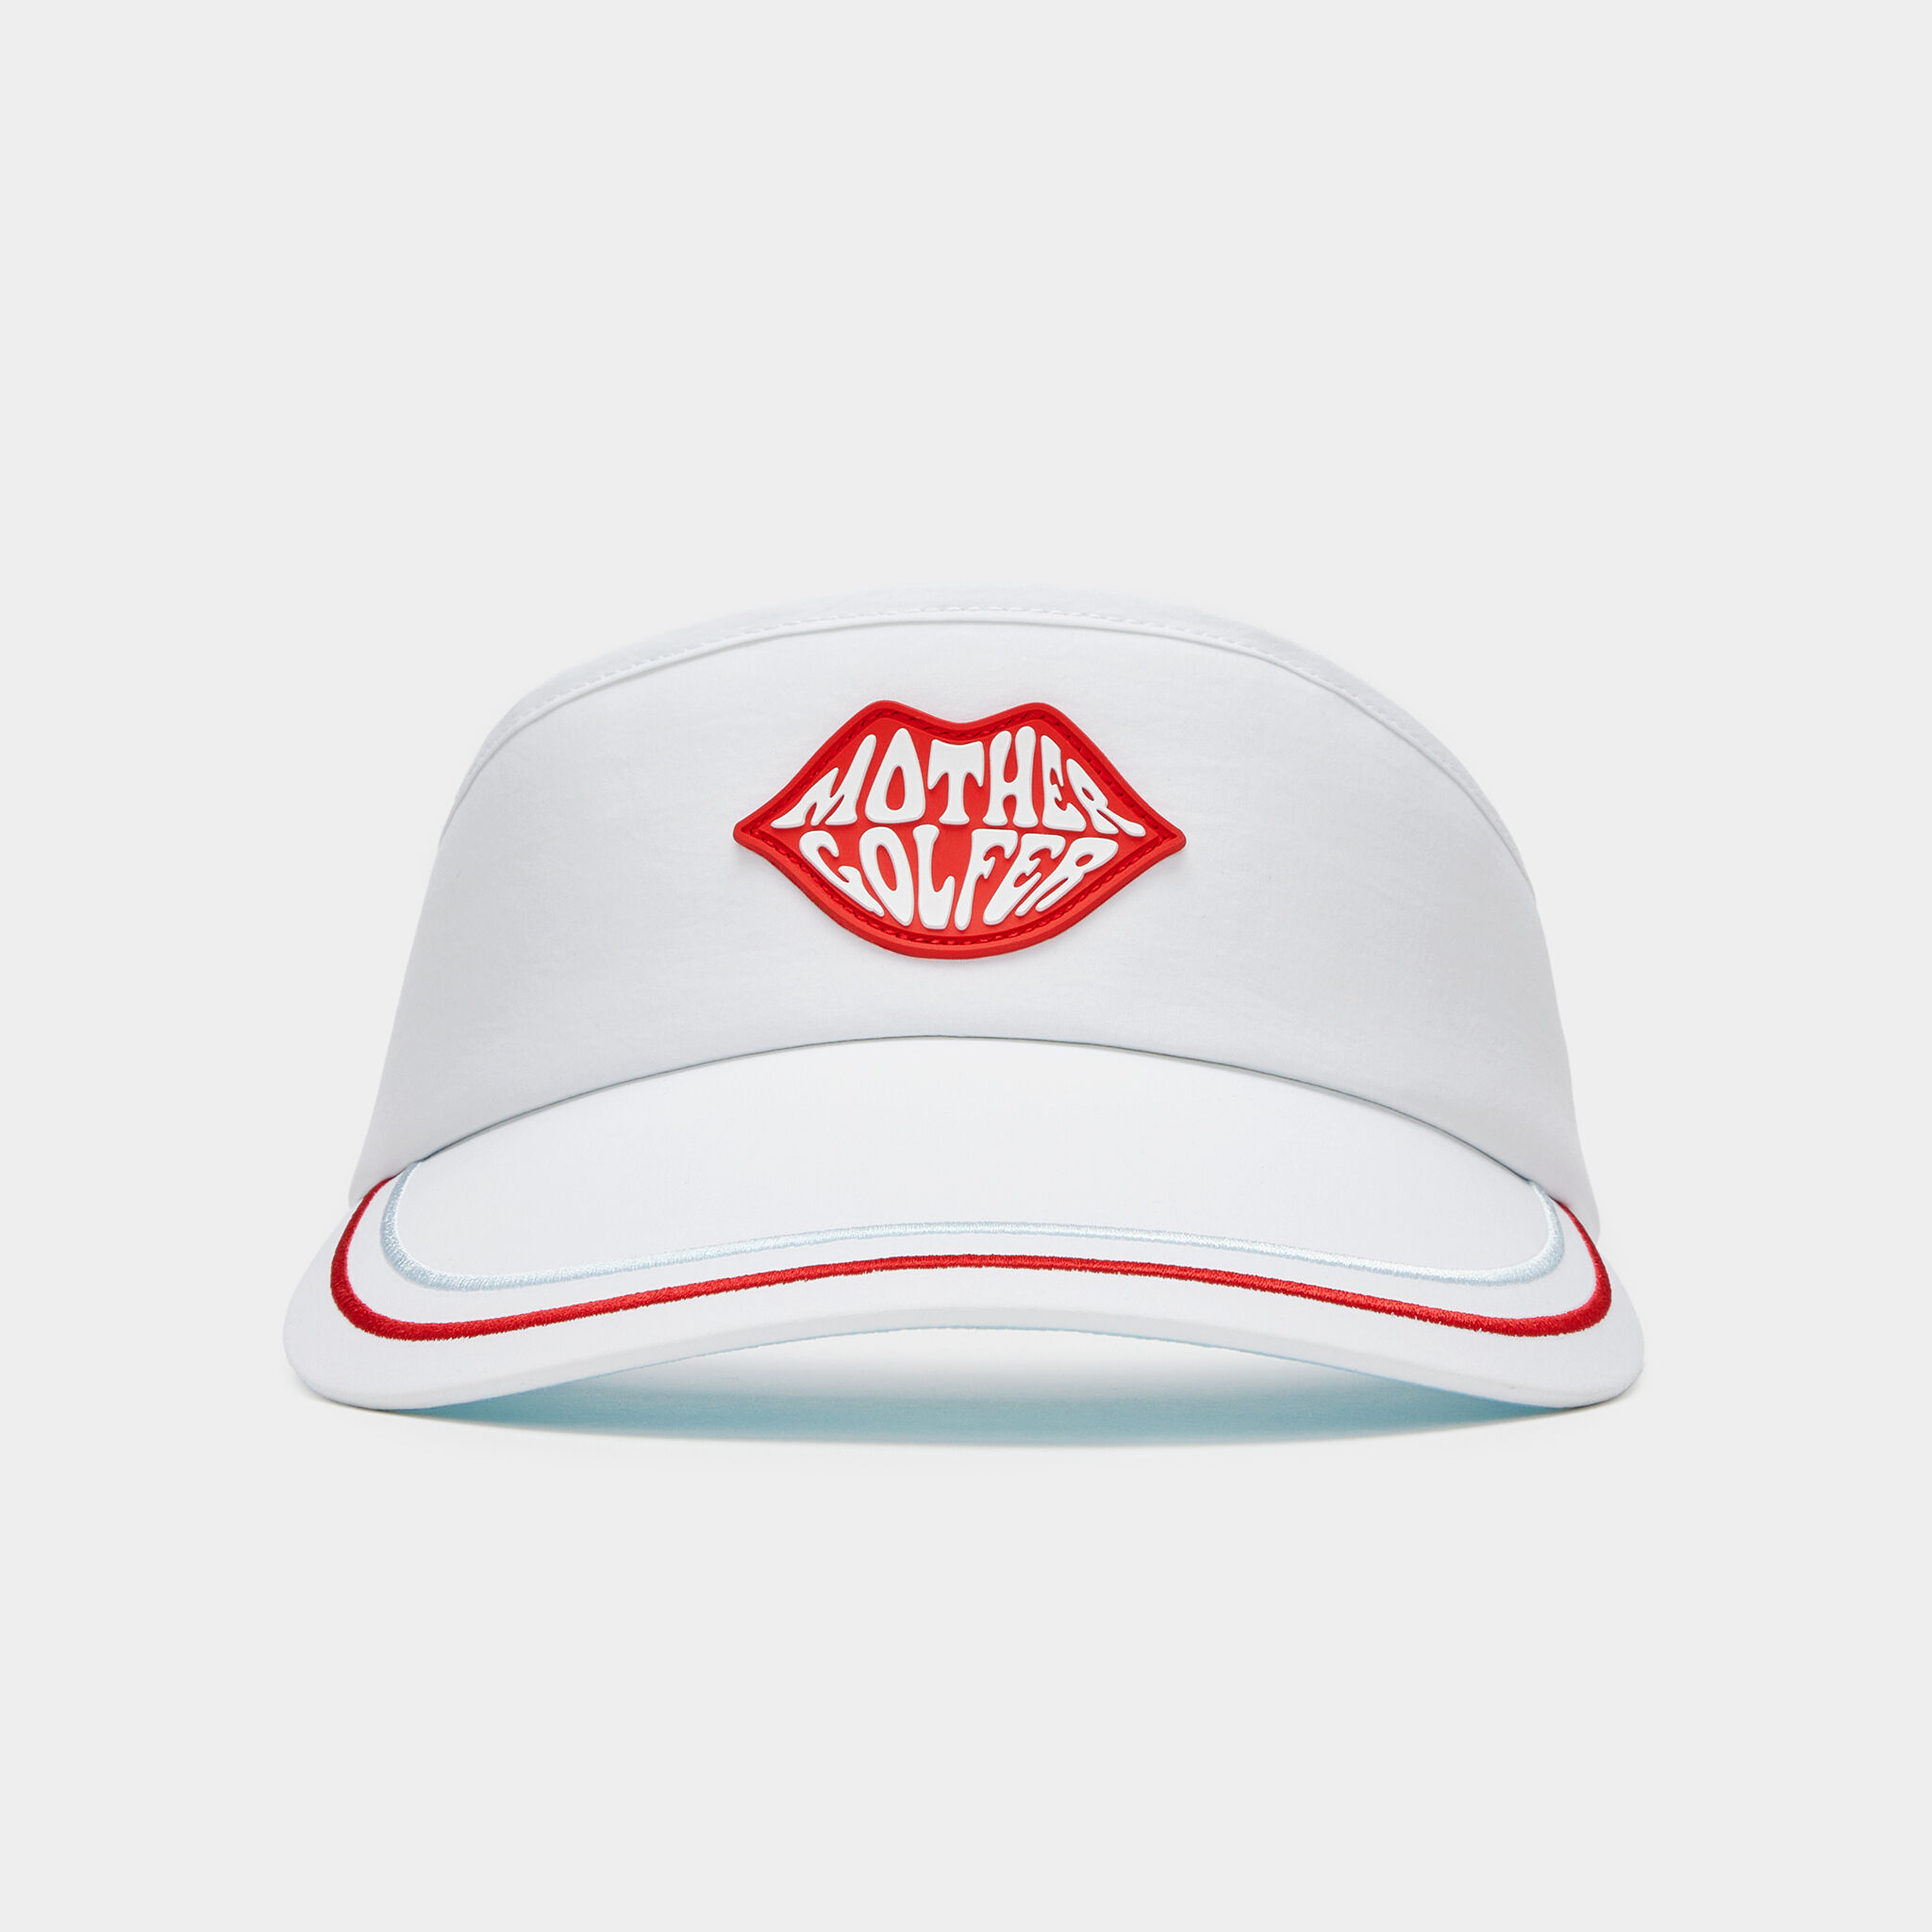 LIMITED EDITION MOTHER GOLFER VISOR | WOMEN'S HATS | G/FORE